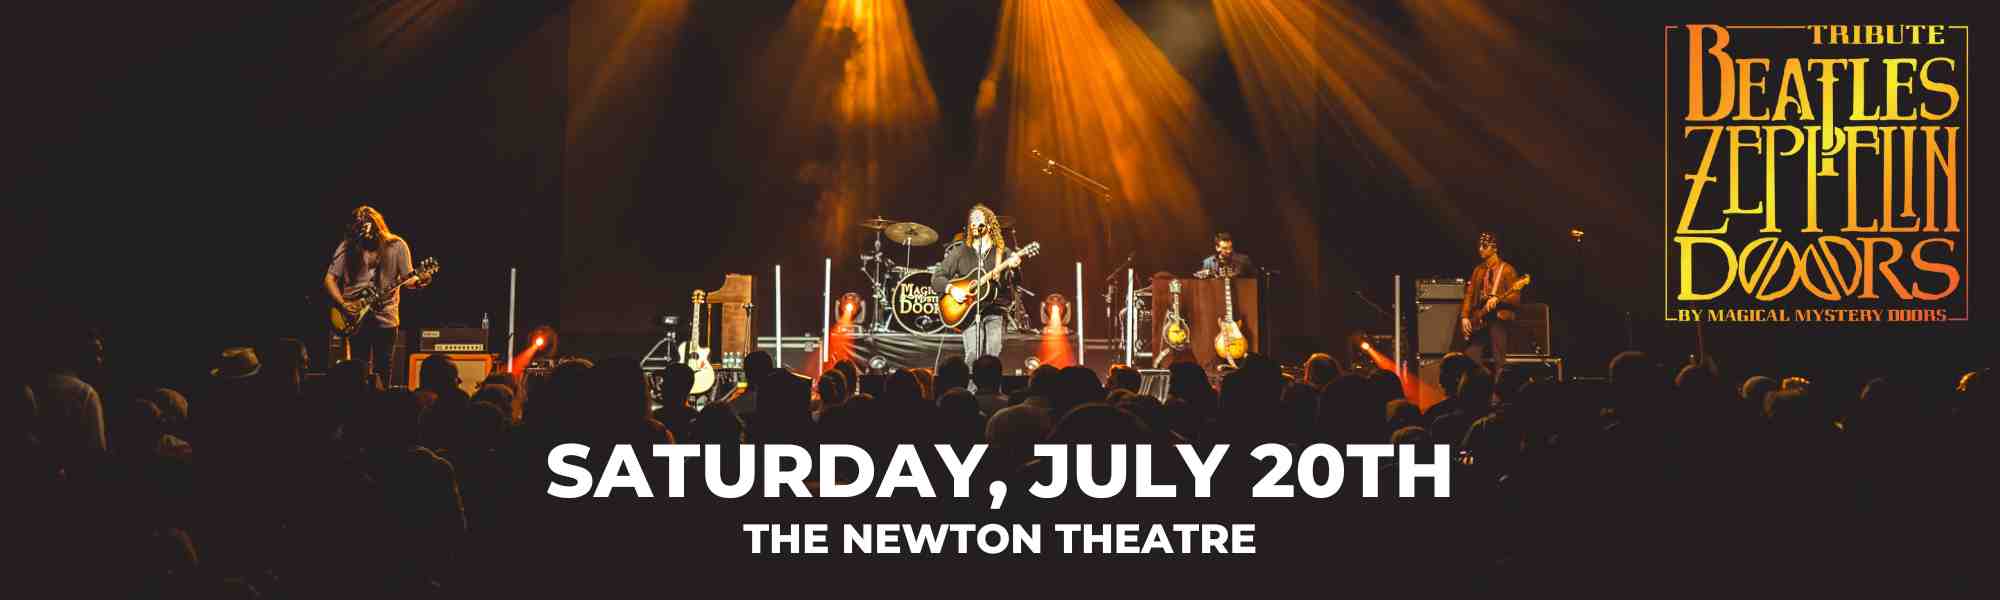 Magical Mystery Doors plays at The Newton Theatre on Saturday, July 20th.